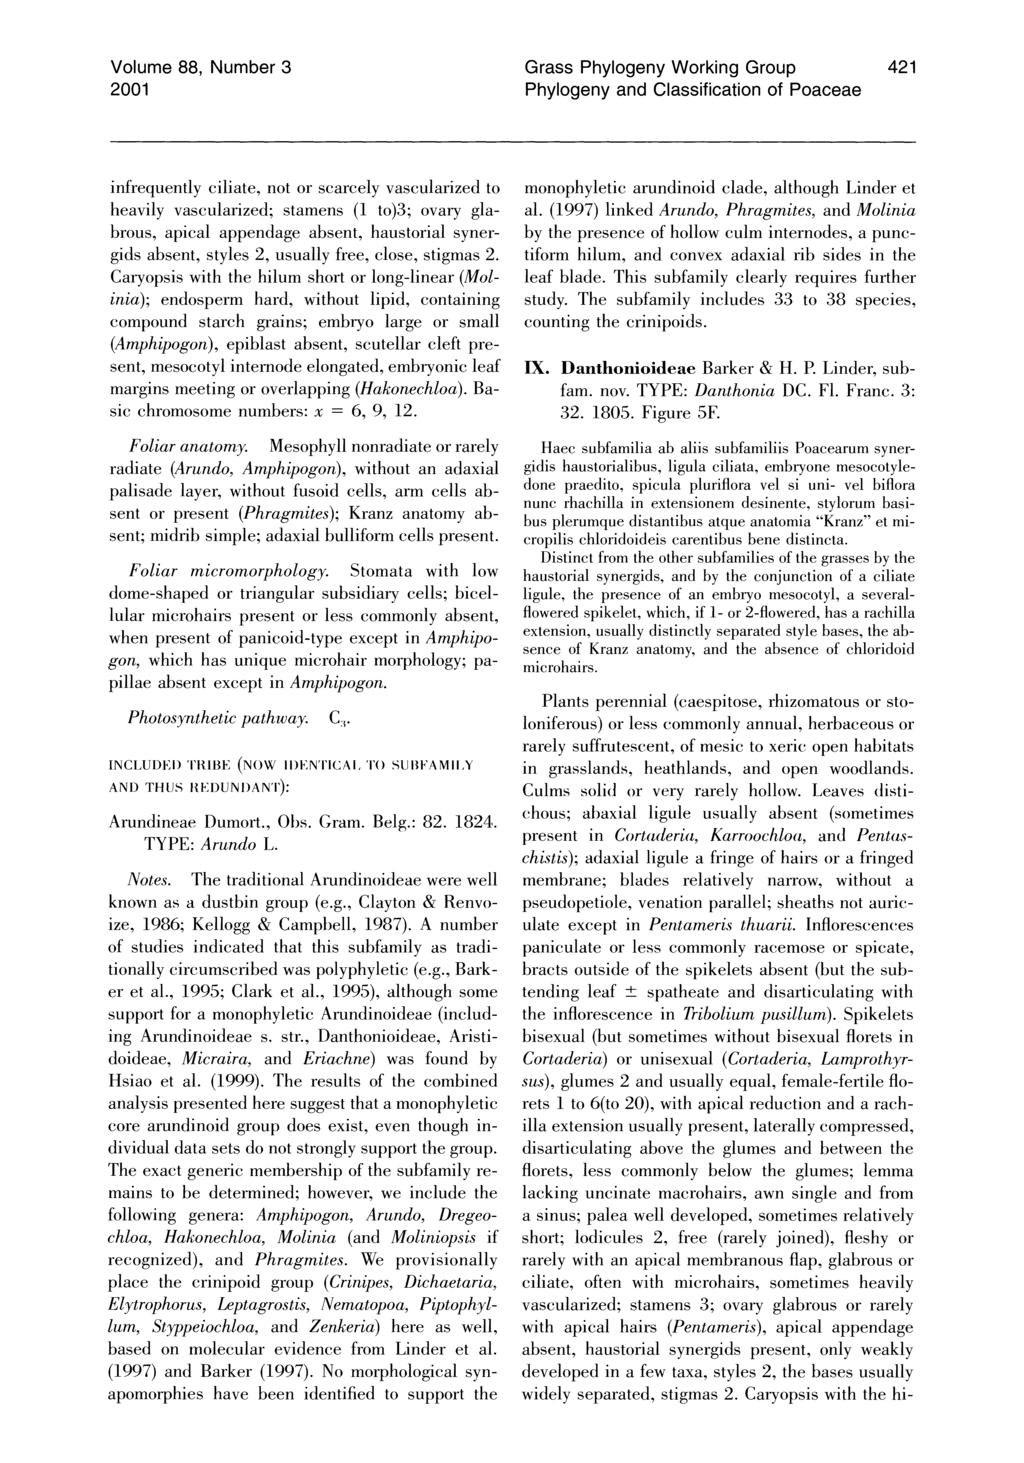 Volume 88, Number 3 2001 Grass Phylogeny Working Group Phylogeny and Classification of Poaceae 421 infrequently ciliate, not or scarcely vascularized to heavily vascularized; stamens (1 to)3; ovary